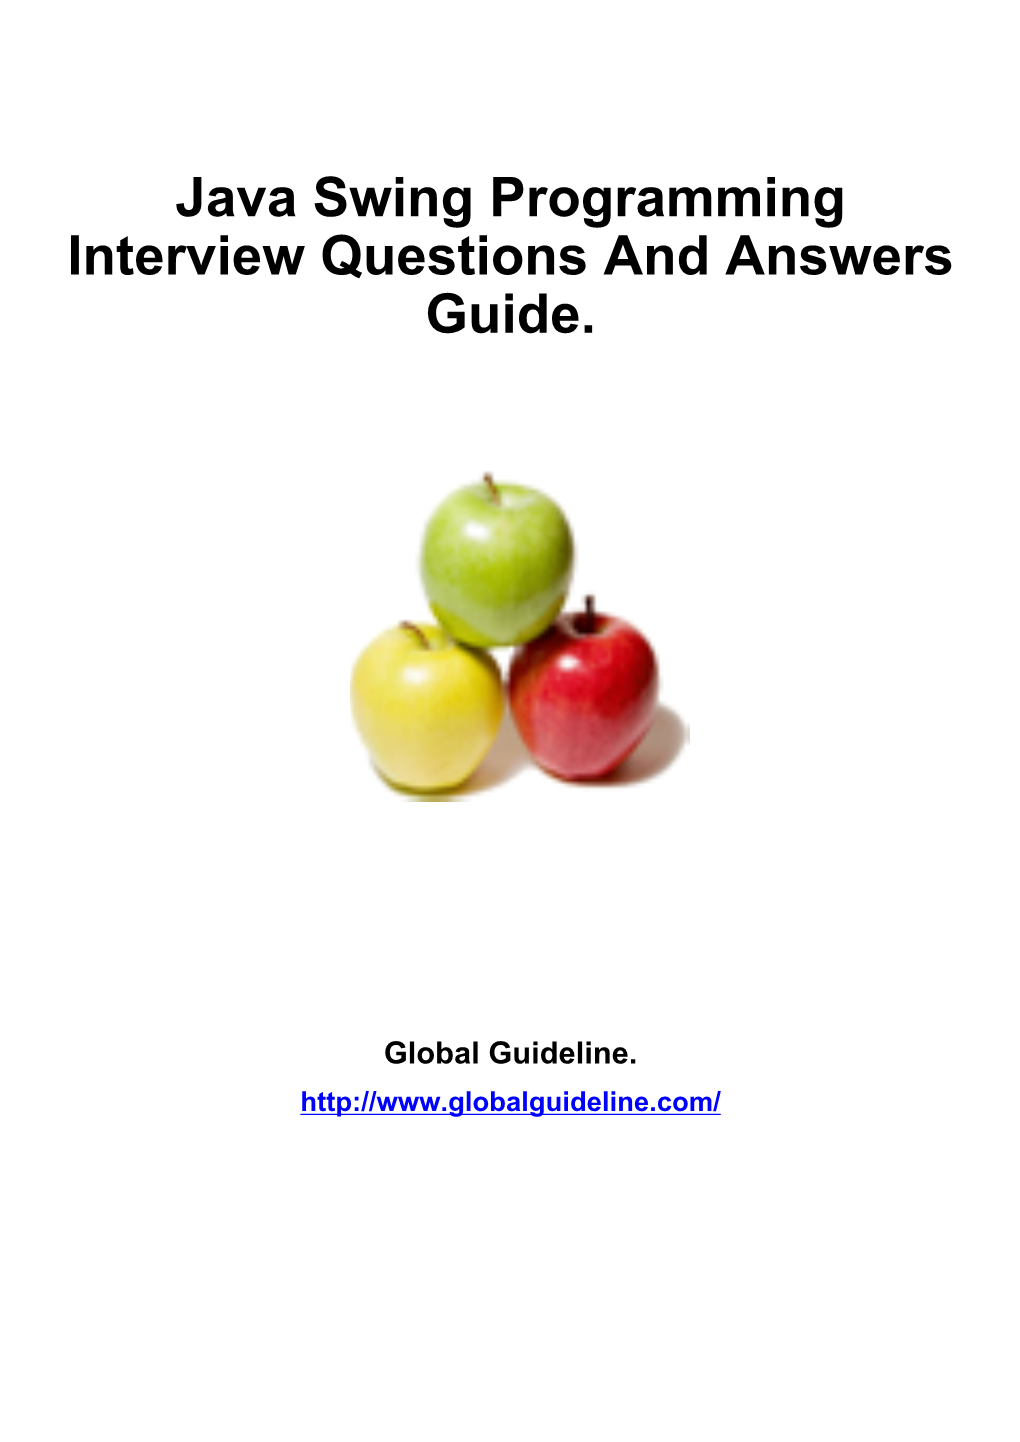 Java Swing Programming Interview Questions and Answers Guide